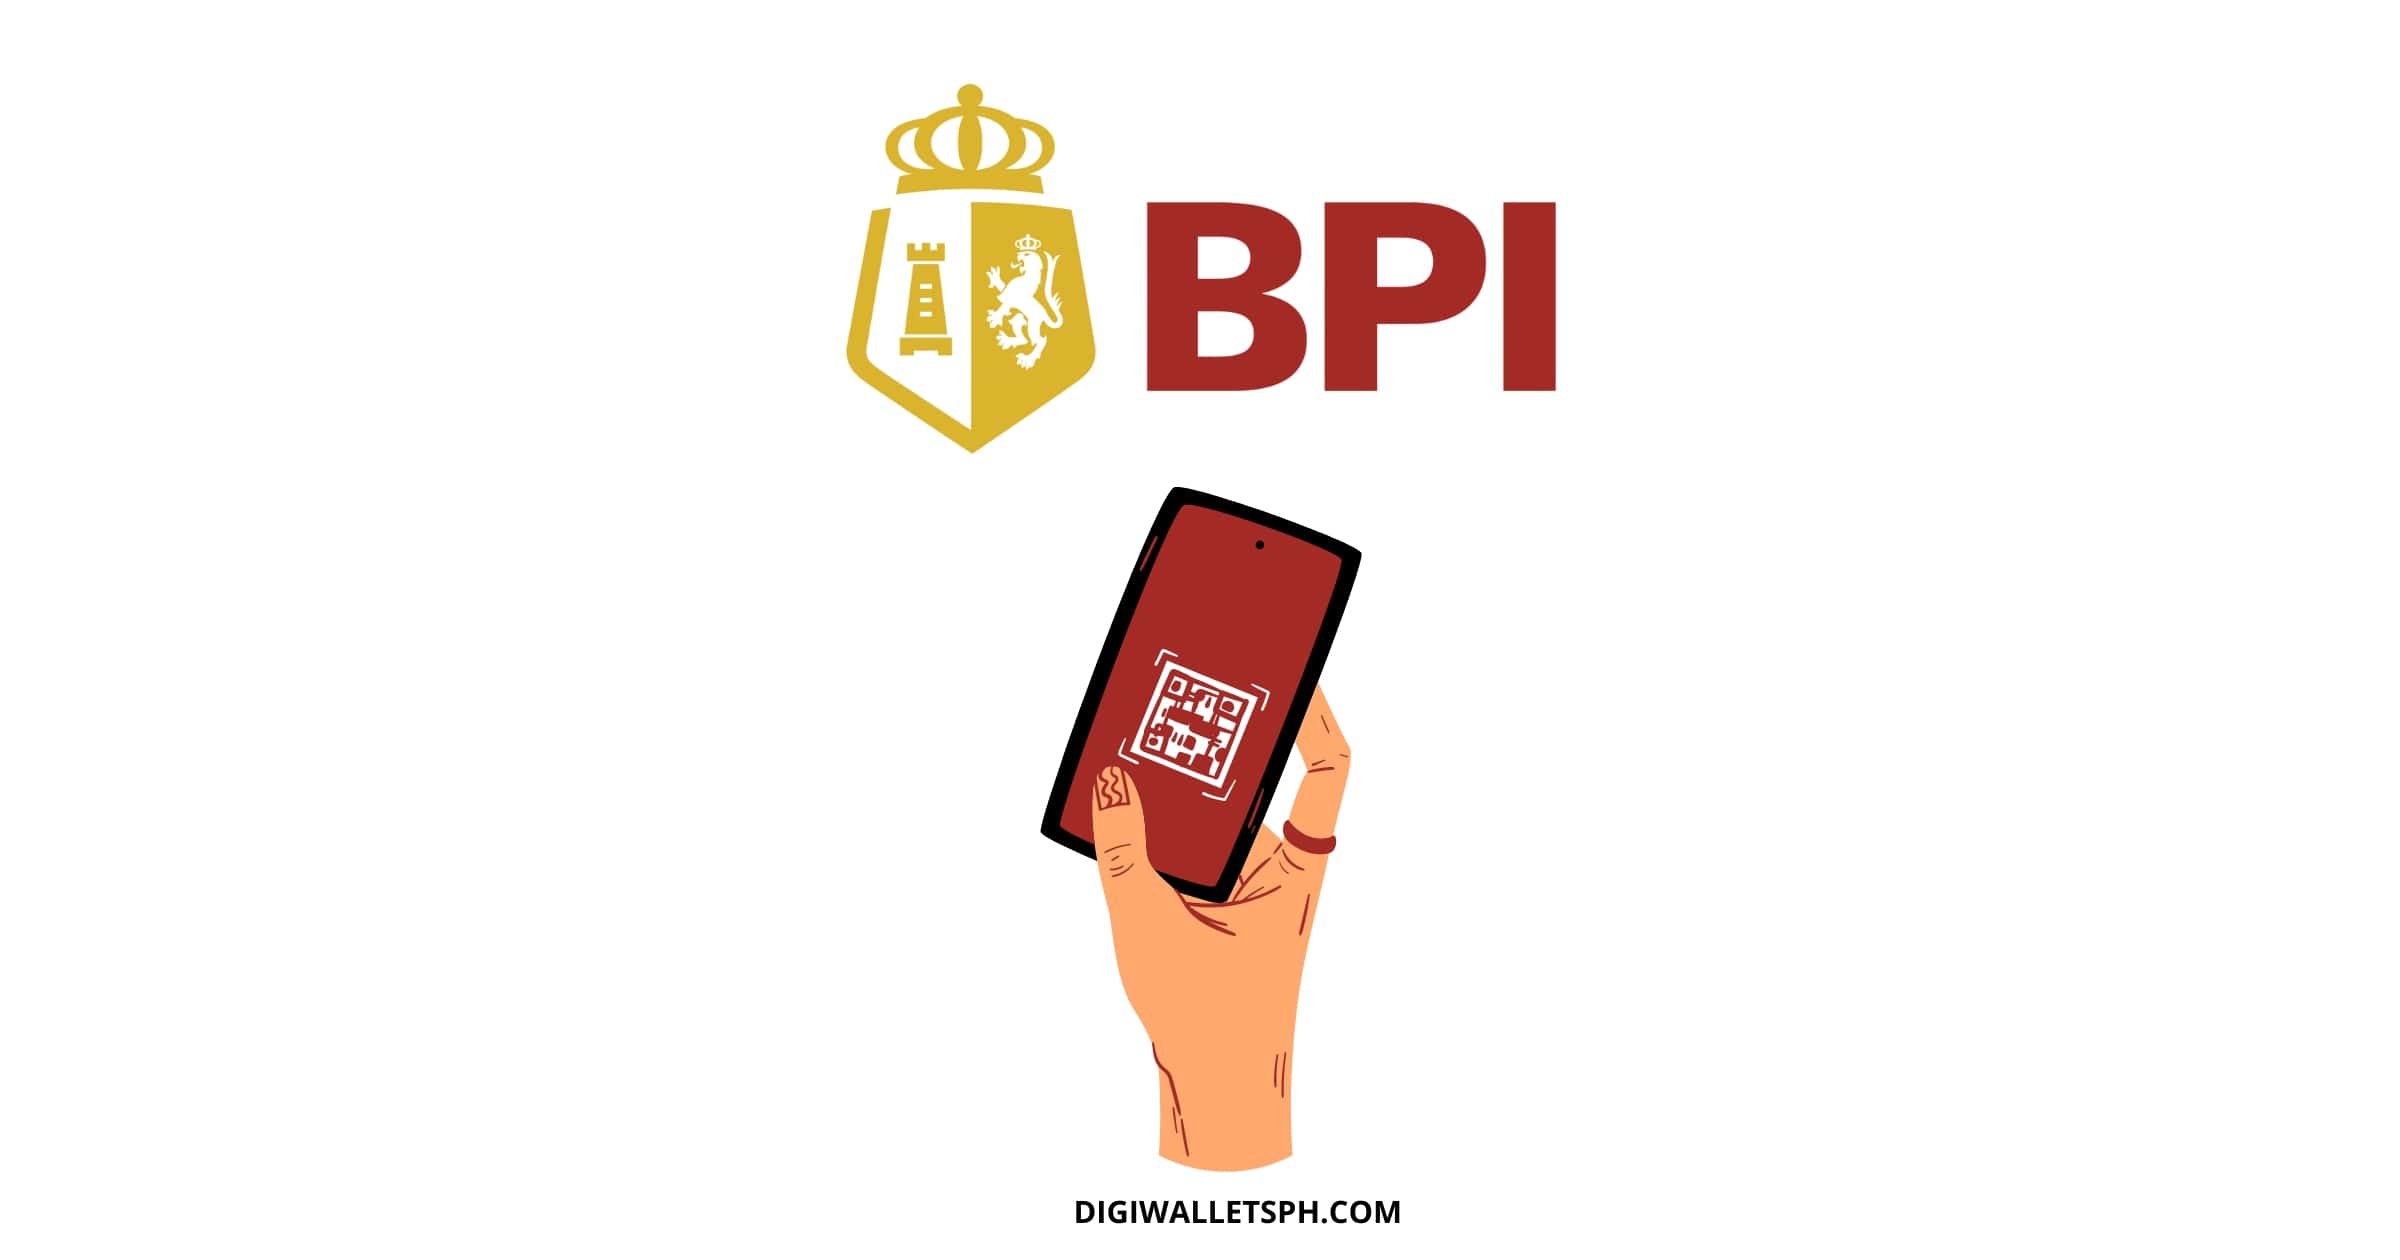 How to generate QR code BPI